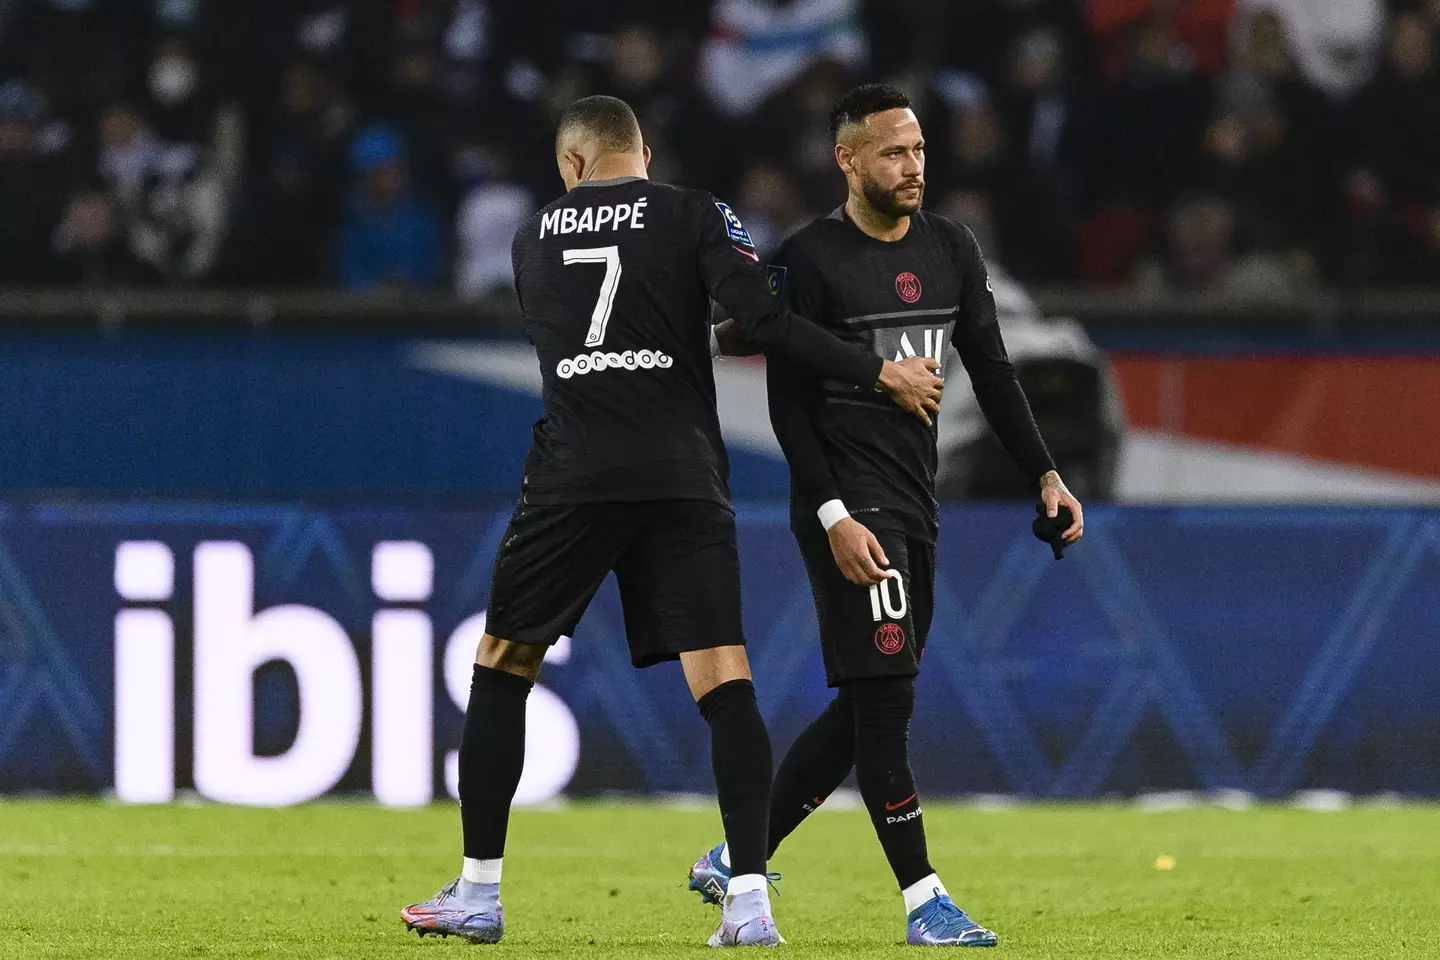 Mbappe and Neymar also came in for criticism following Wednesday's loss. Image: PA Images